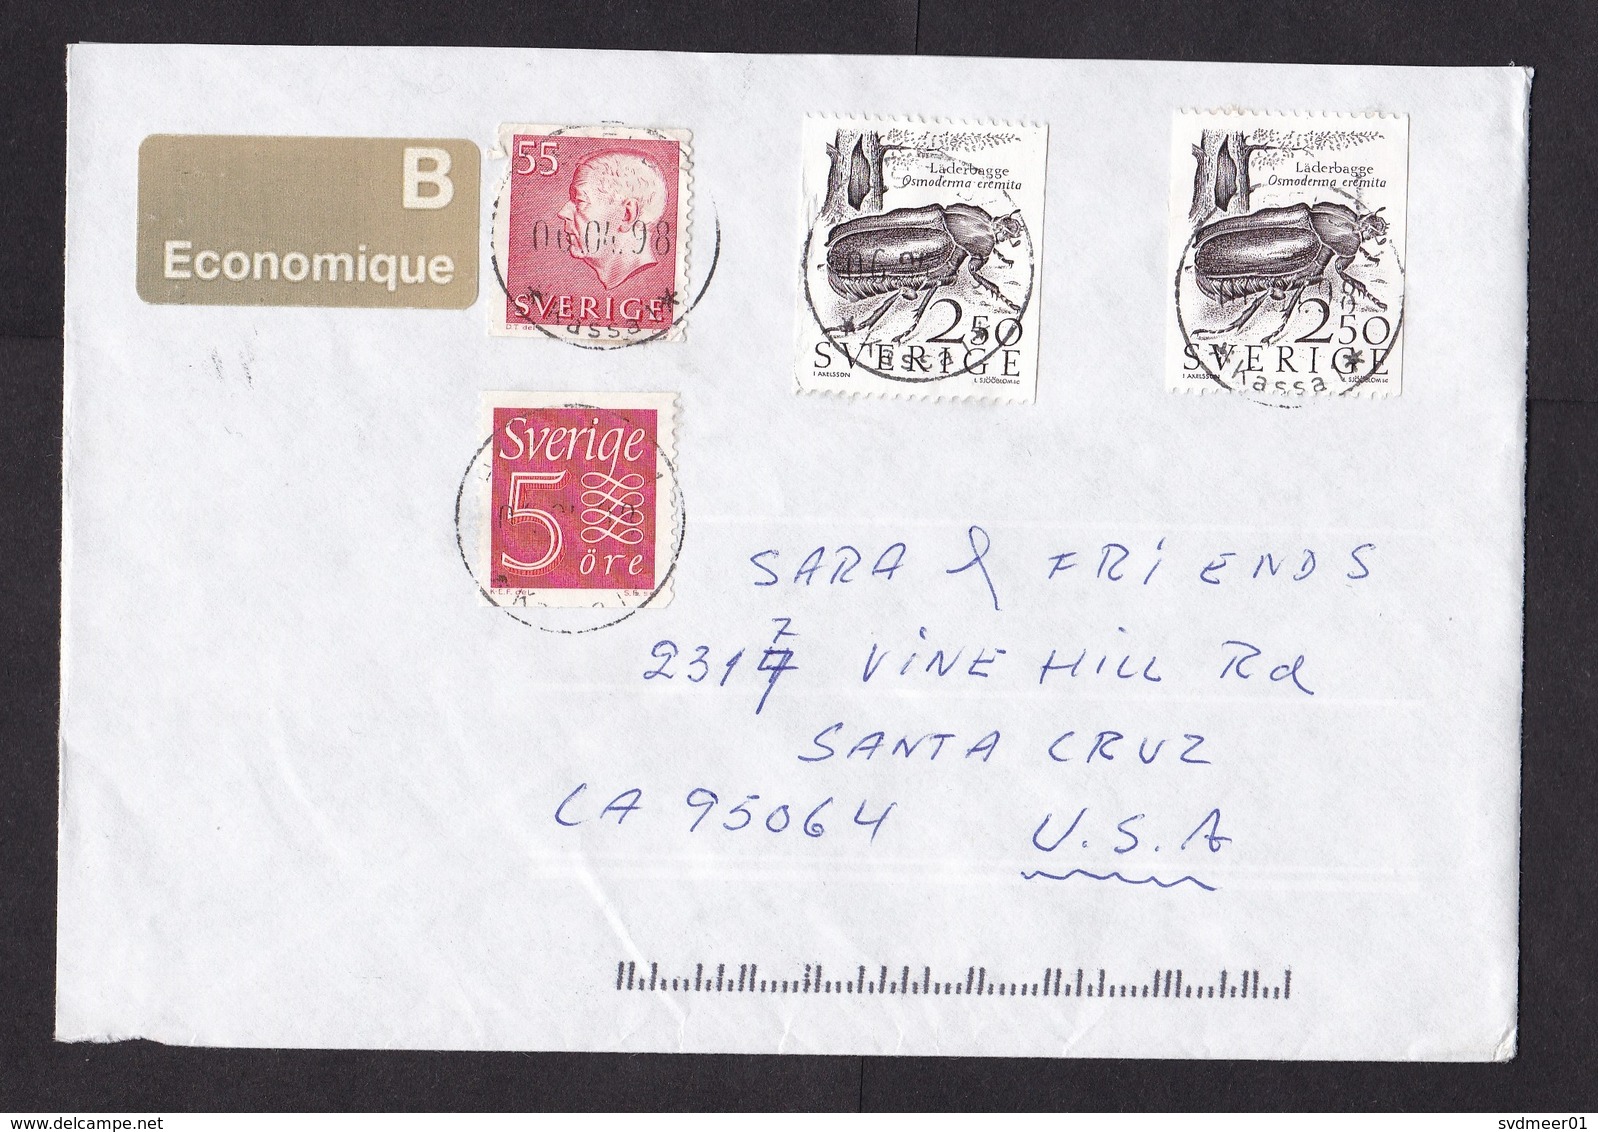 Sweden: Economy Cover To USA, 1998, 4 Stamps, Insect, Bug, Beetle, B Economique Label (traces Of Use) - Briefe U. Dokumente